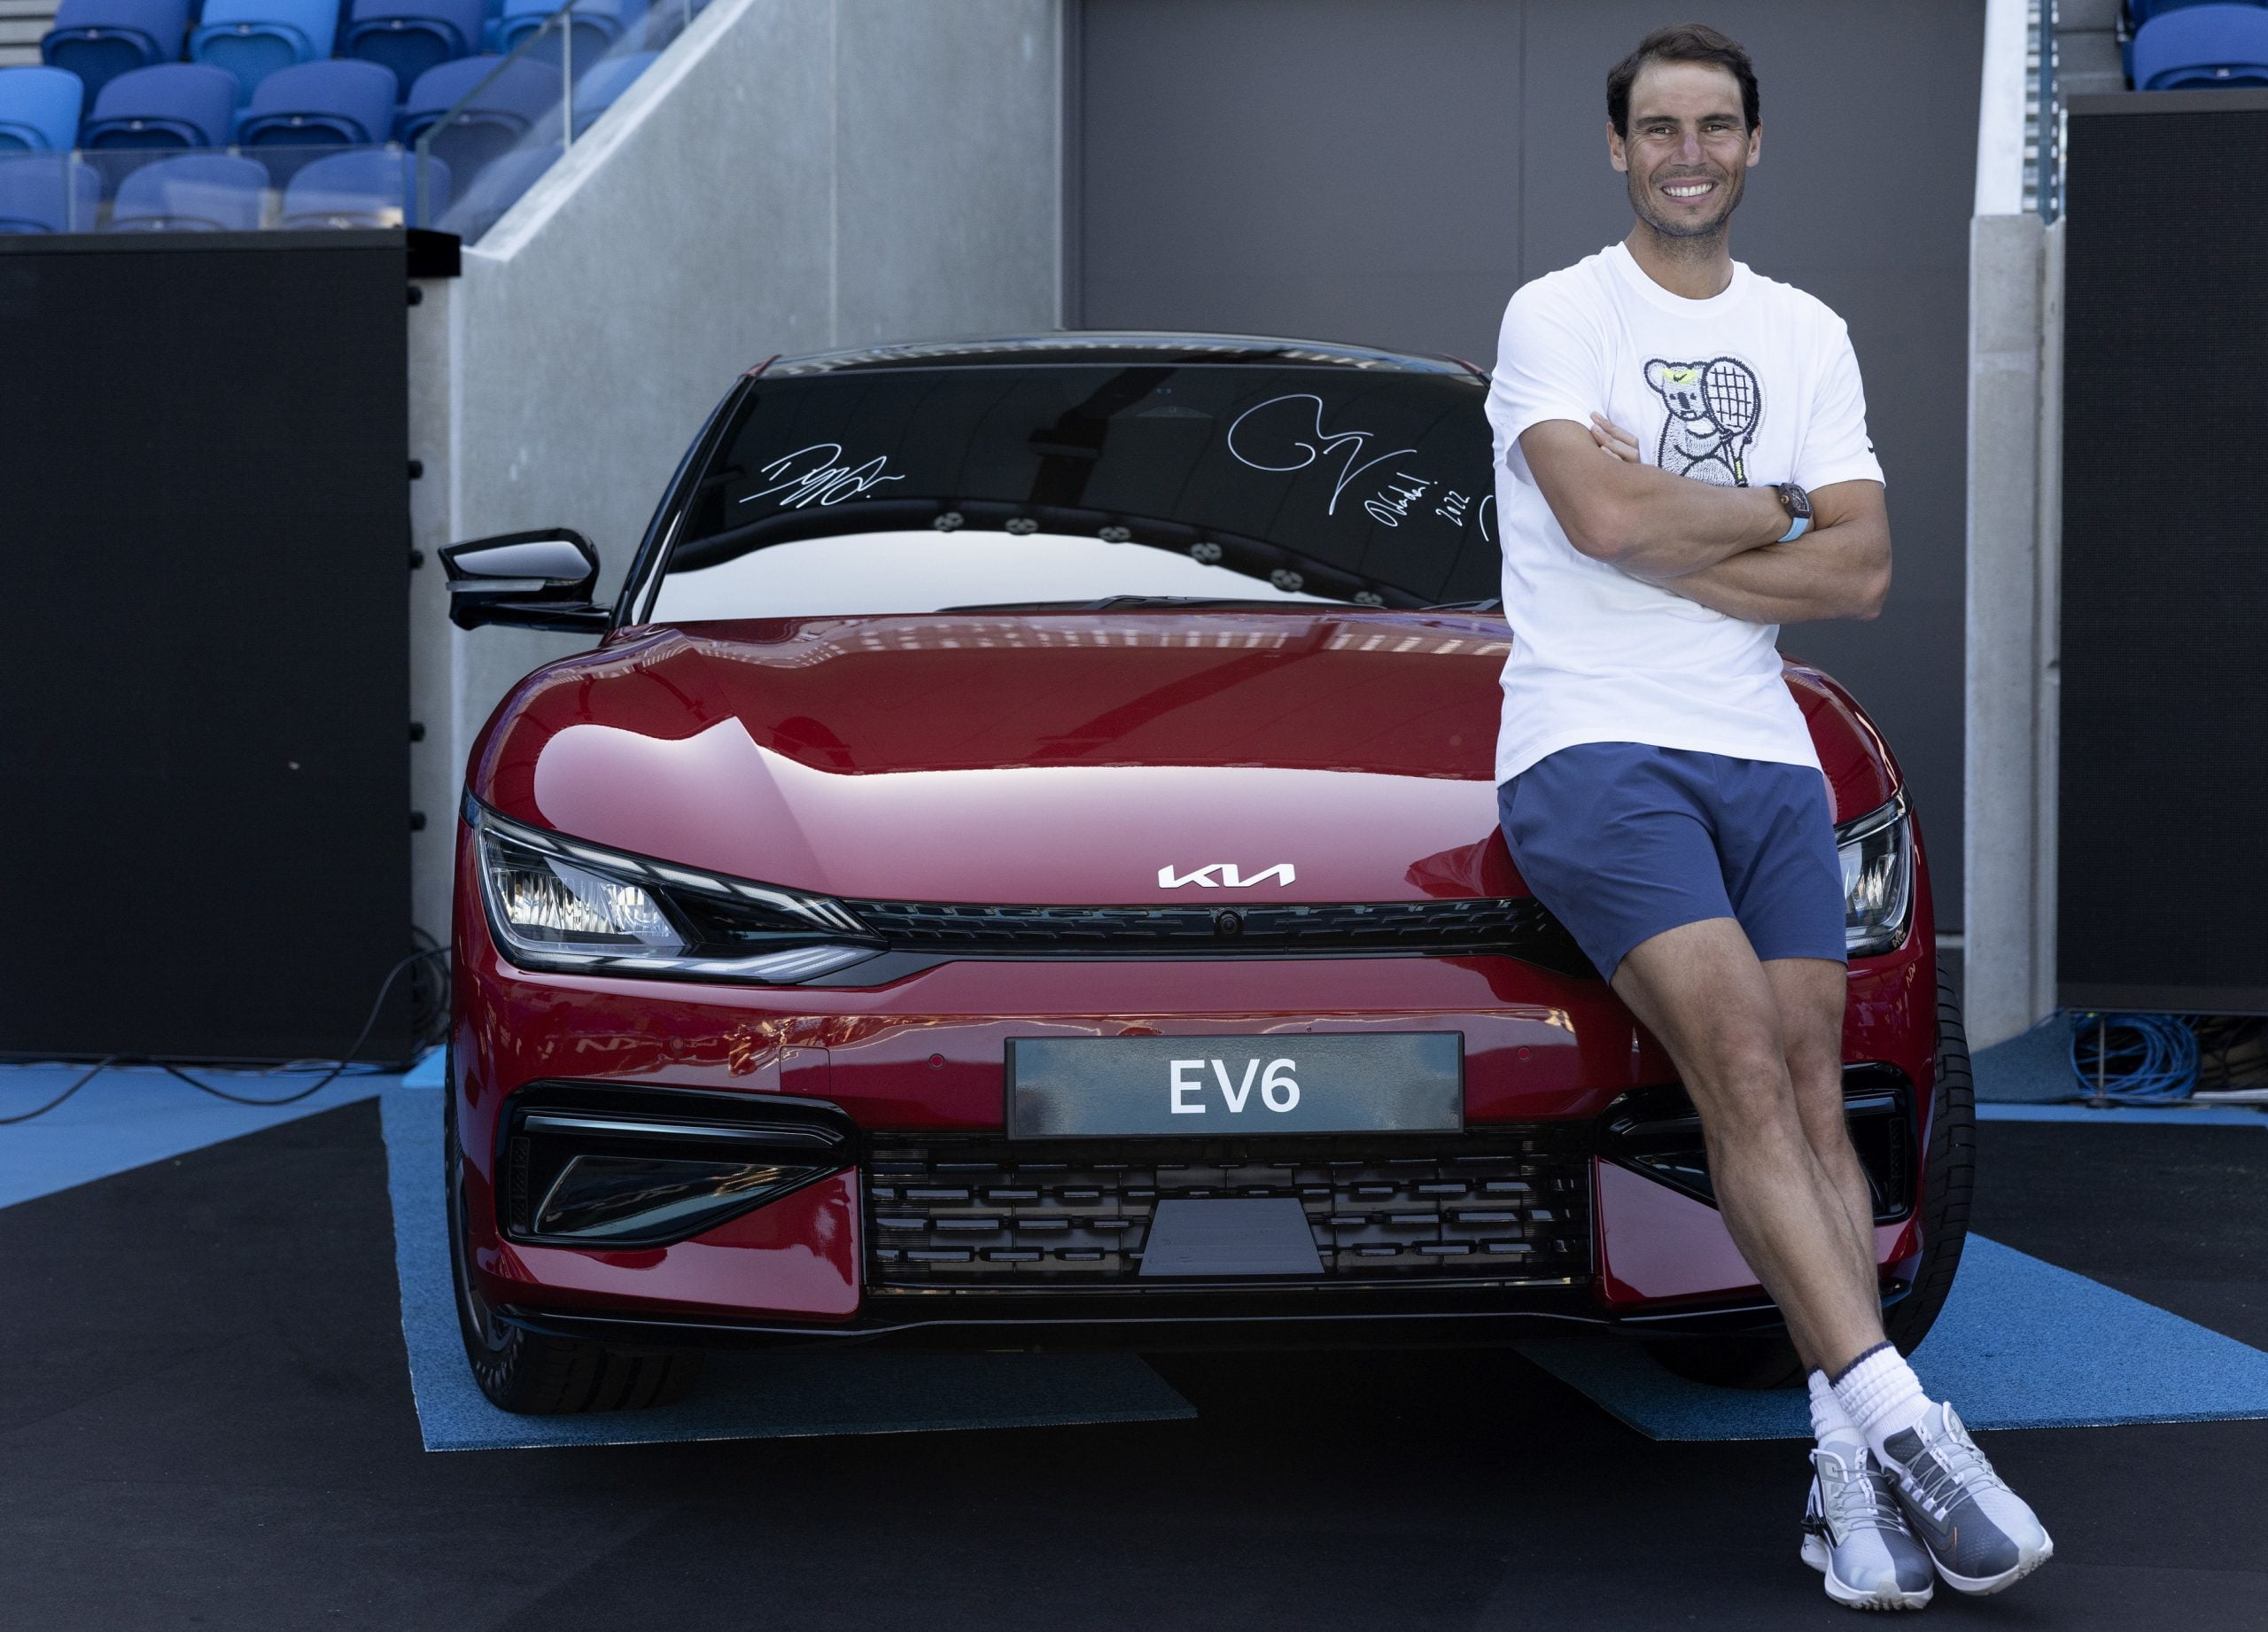 Kia announces to support Australian Open 2022 with official tournament vehicles, opening of Kia Arena